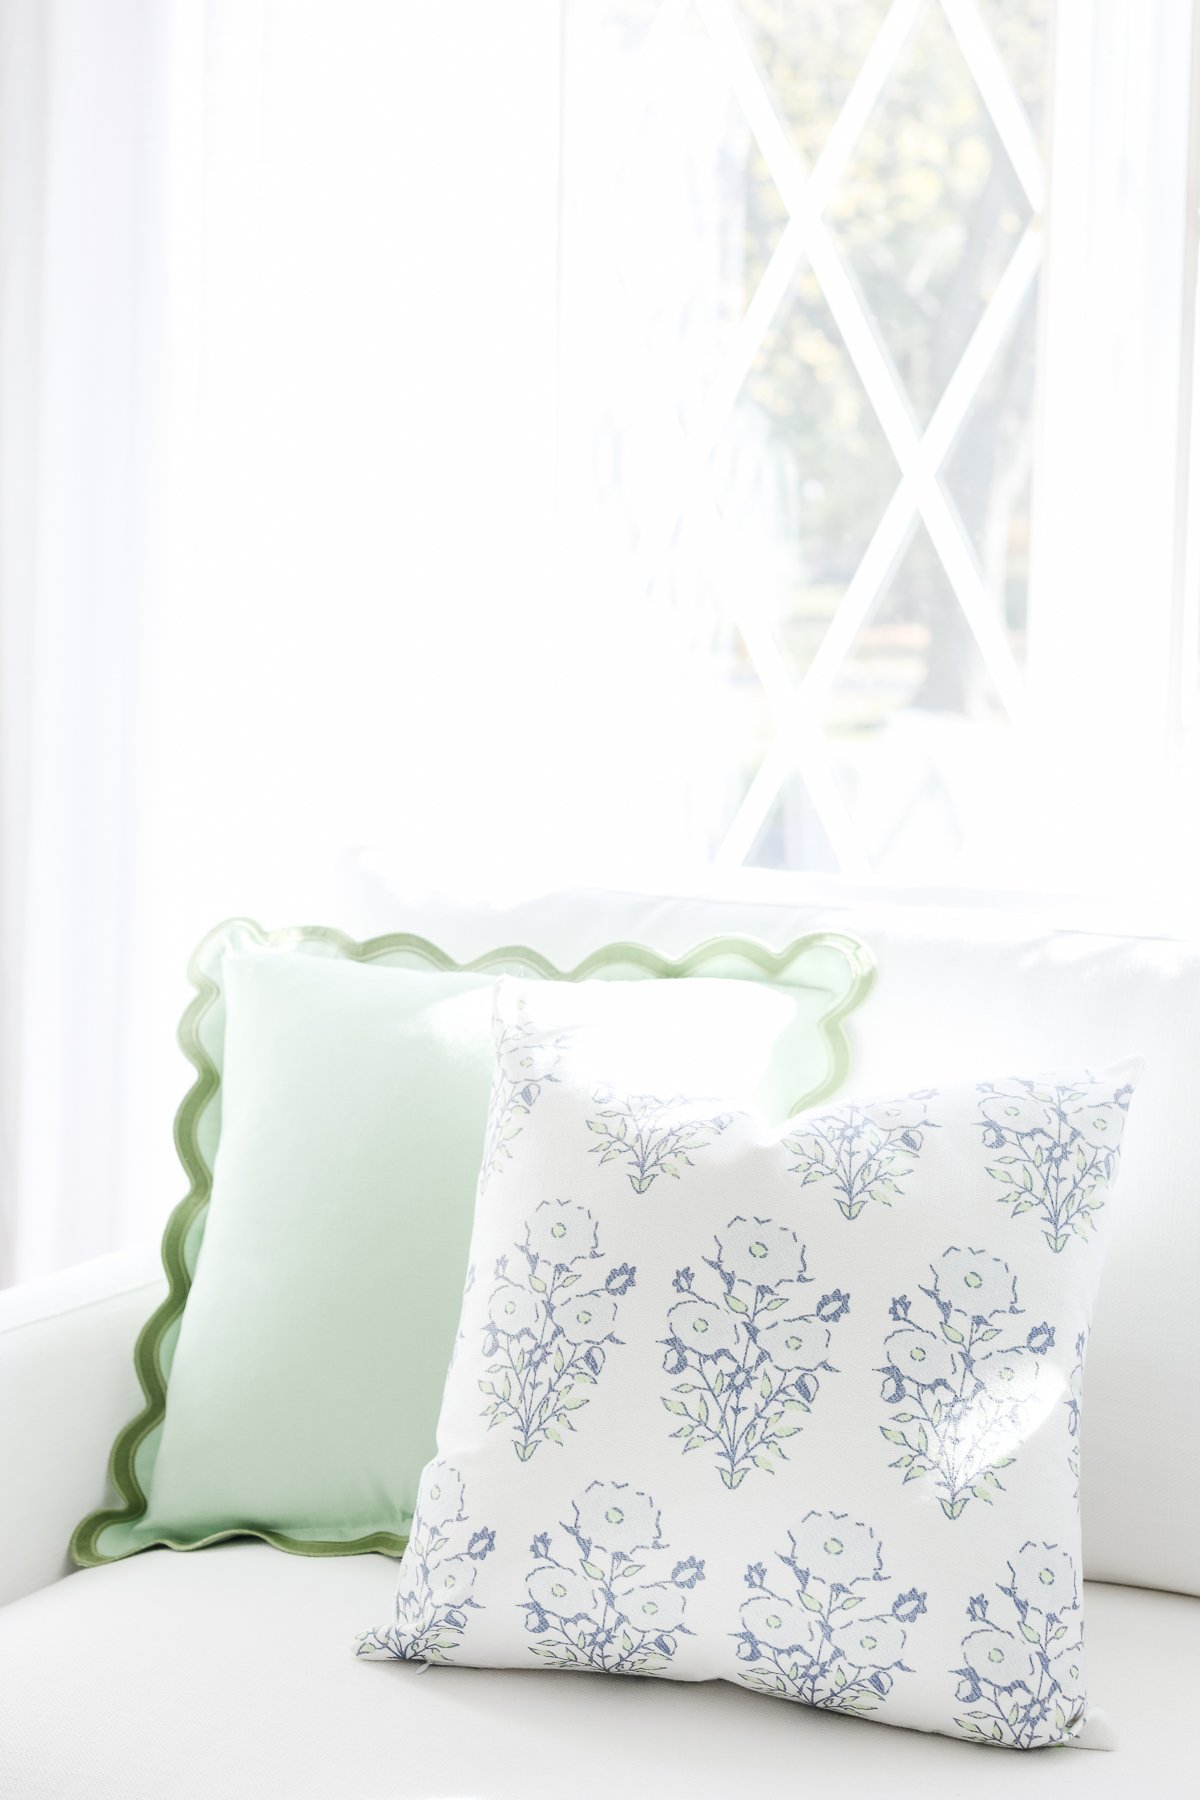 This white couch is adorned with blue and green pillows. Add a touch of color to your living room with these vibrant accents from Amazon pillow covers.